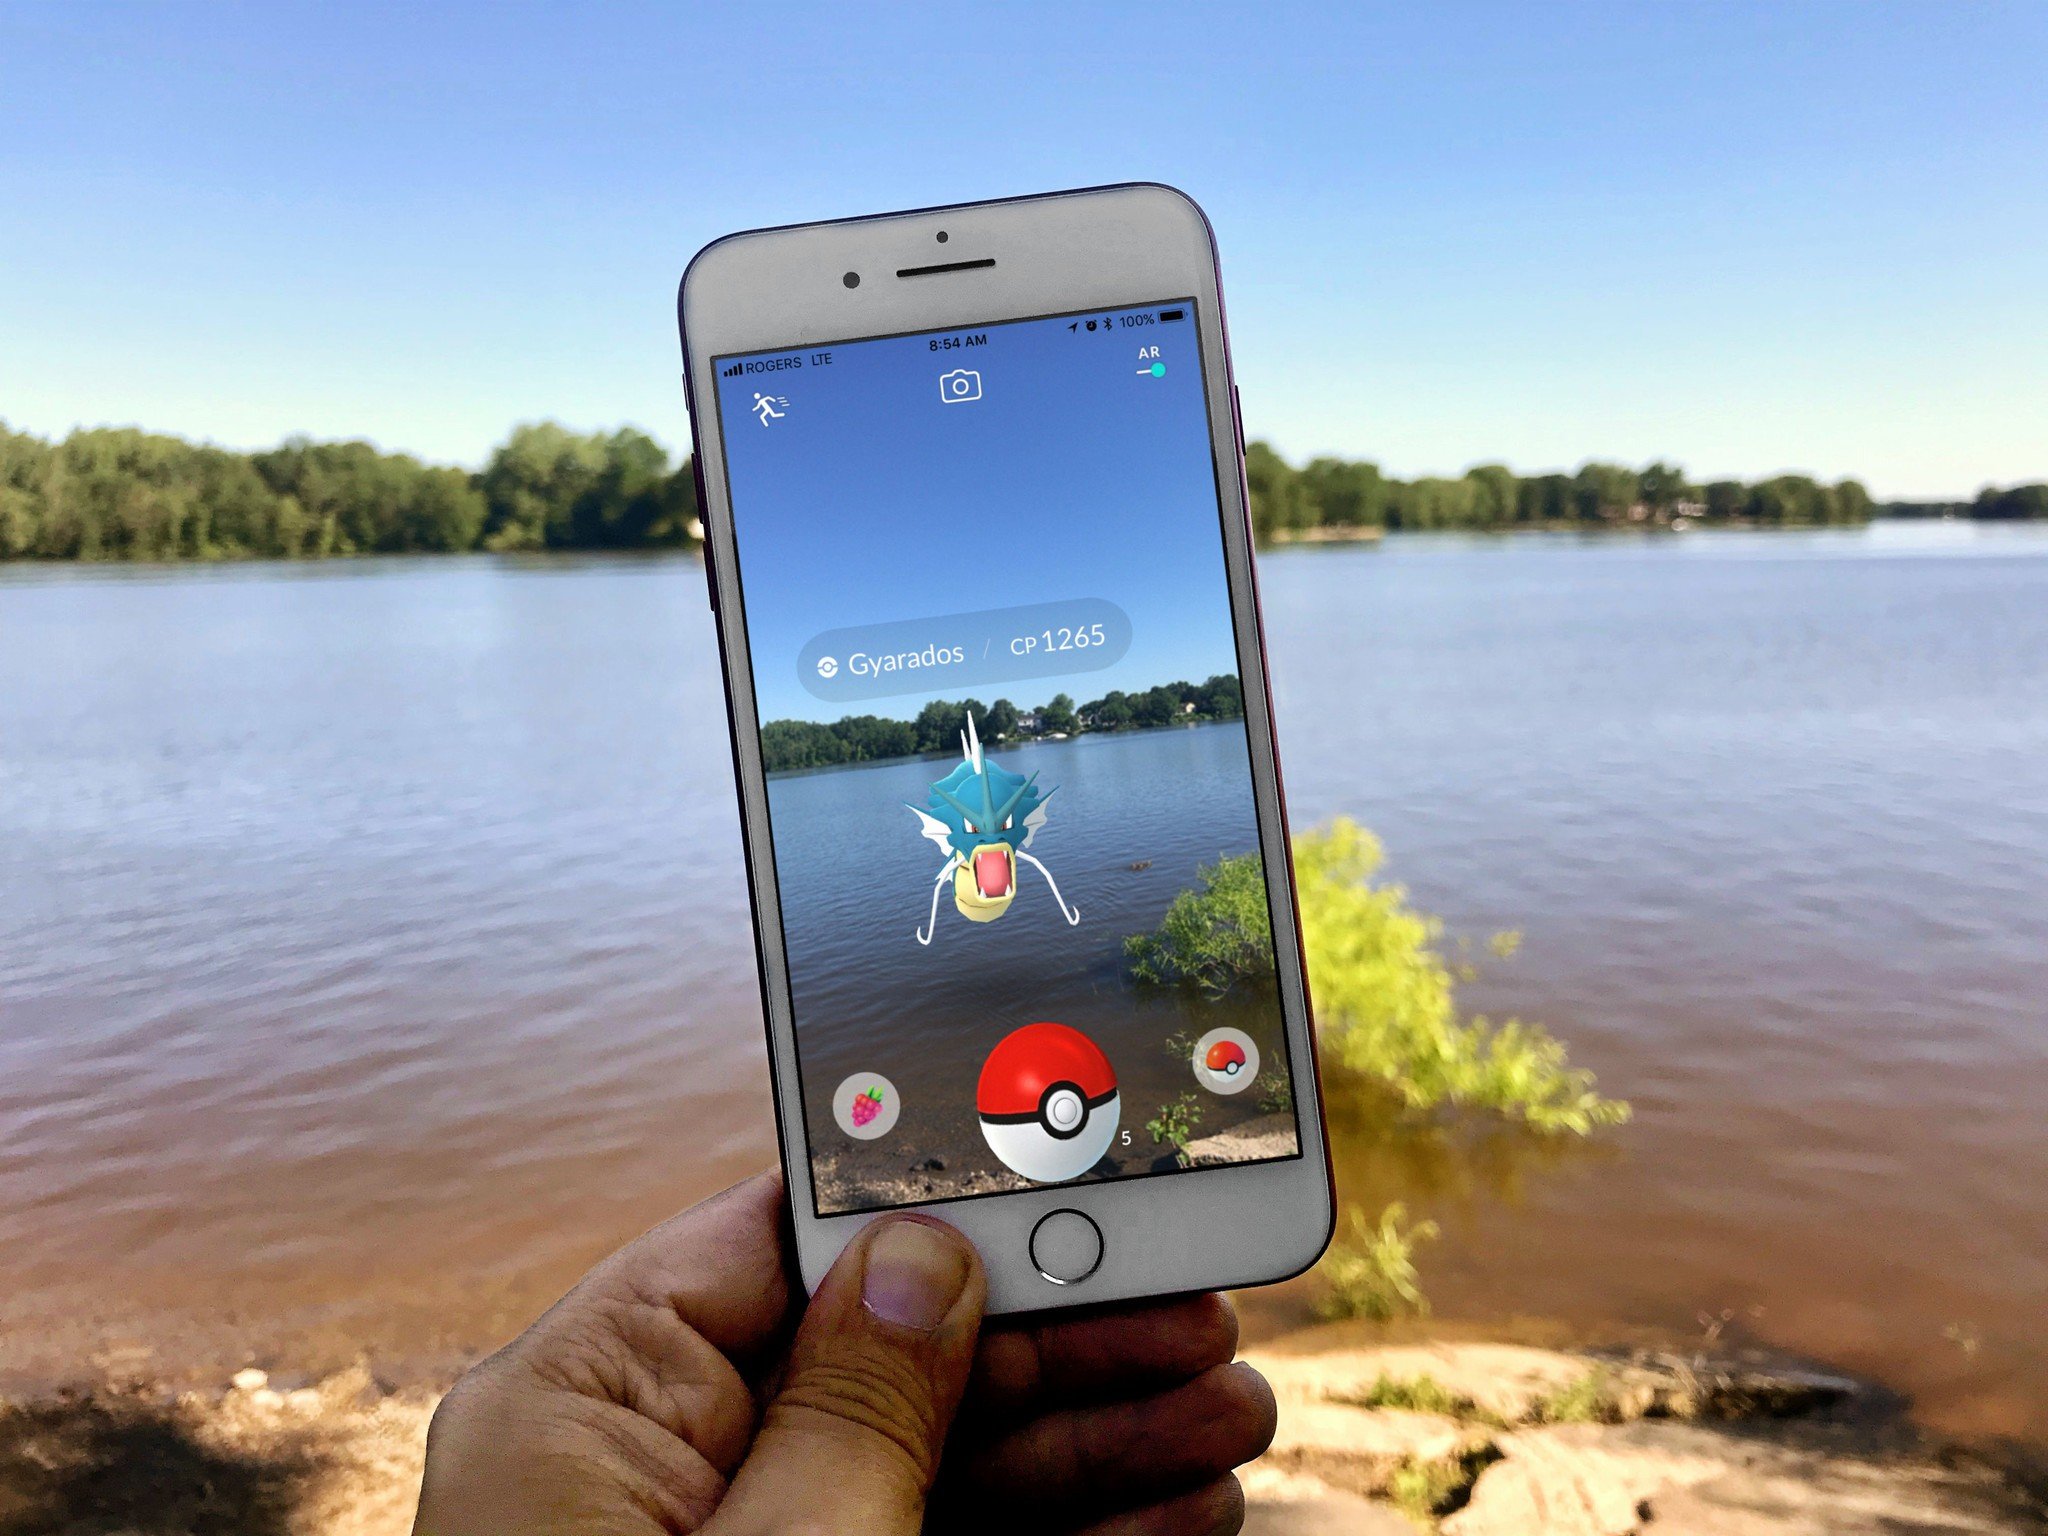 Pokemon Go Plus+ first hands-on impressions - Vooks